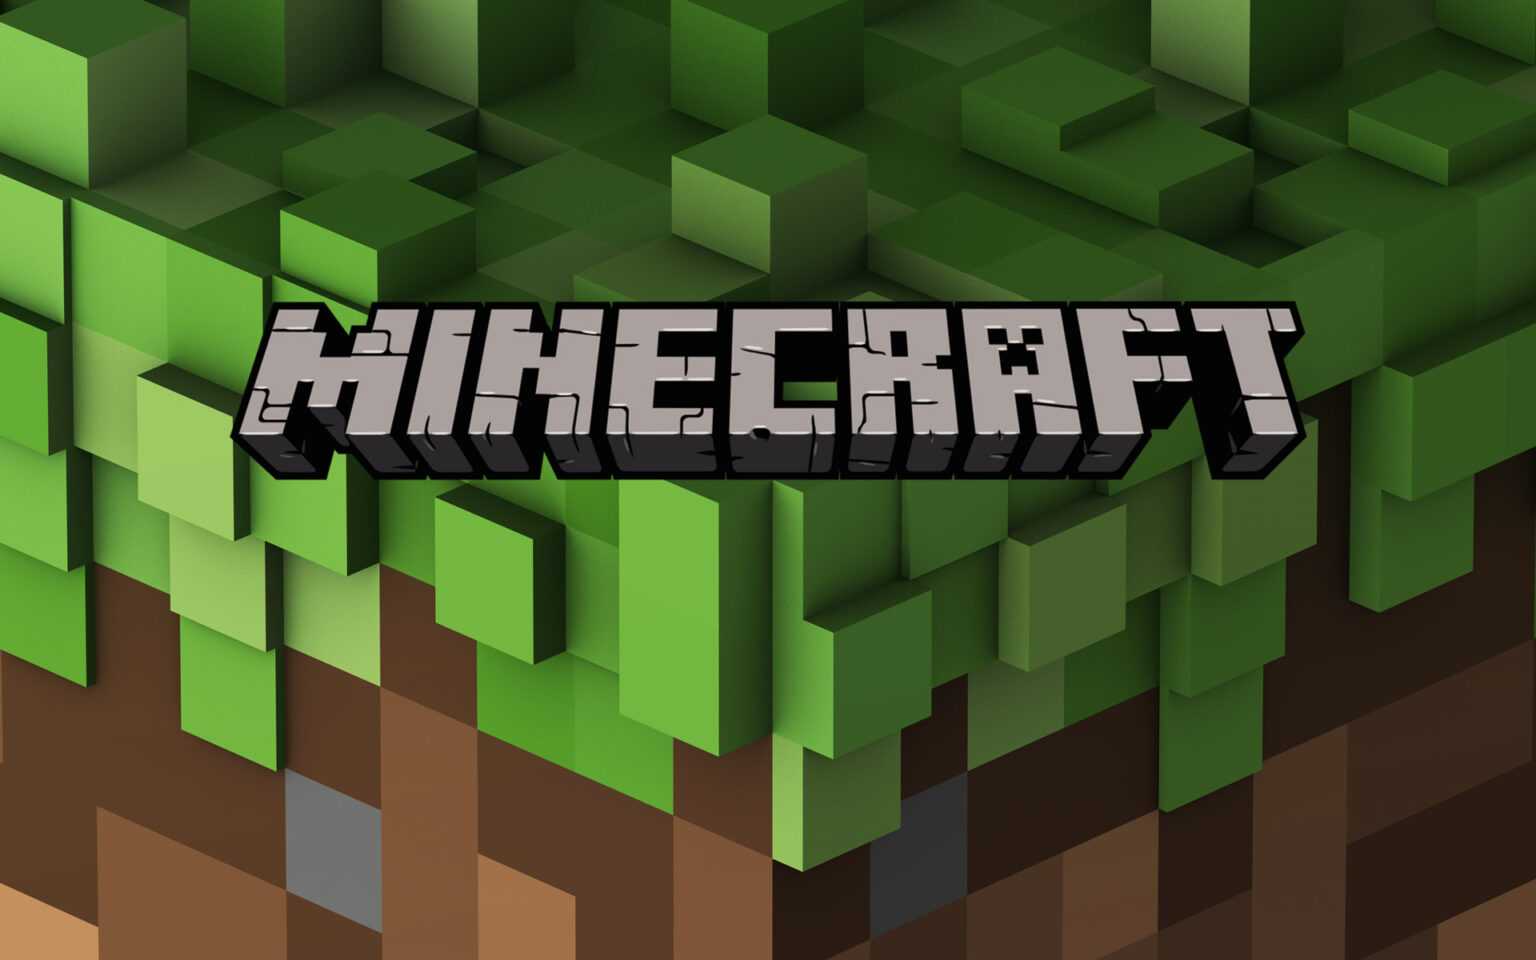 minecraft for pc free download full version 2018